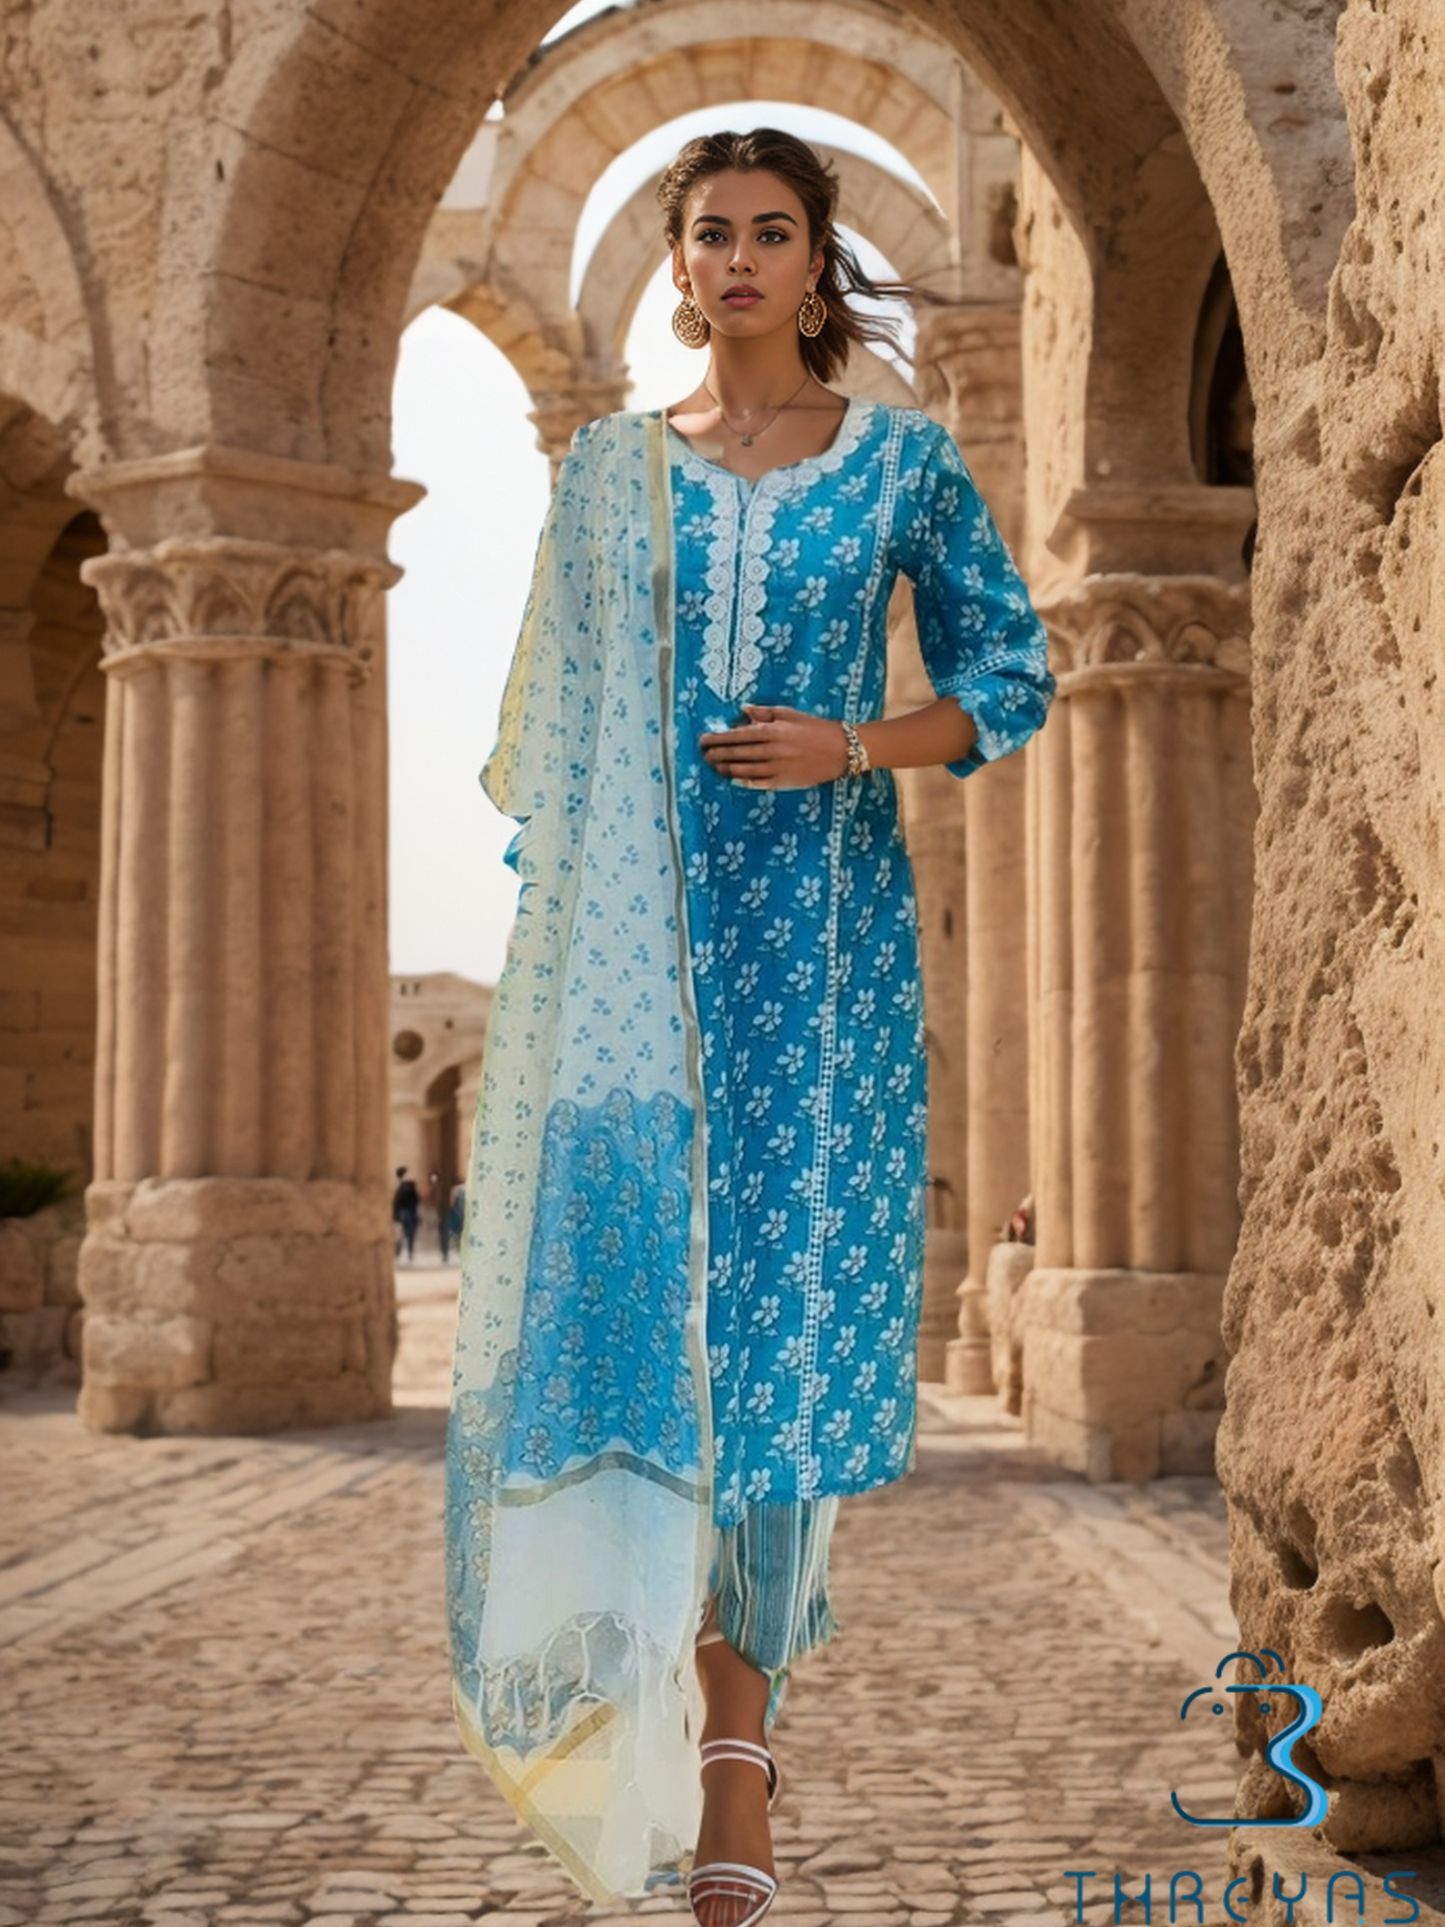 Sky Blue Cotton Kurthis Set Embellished with white Lace for women